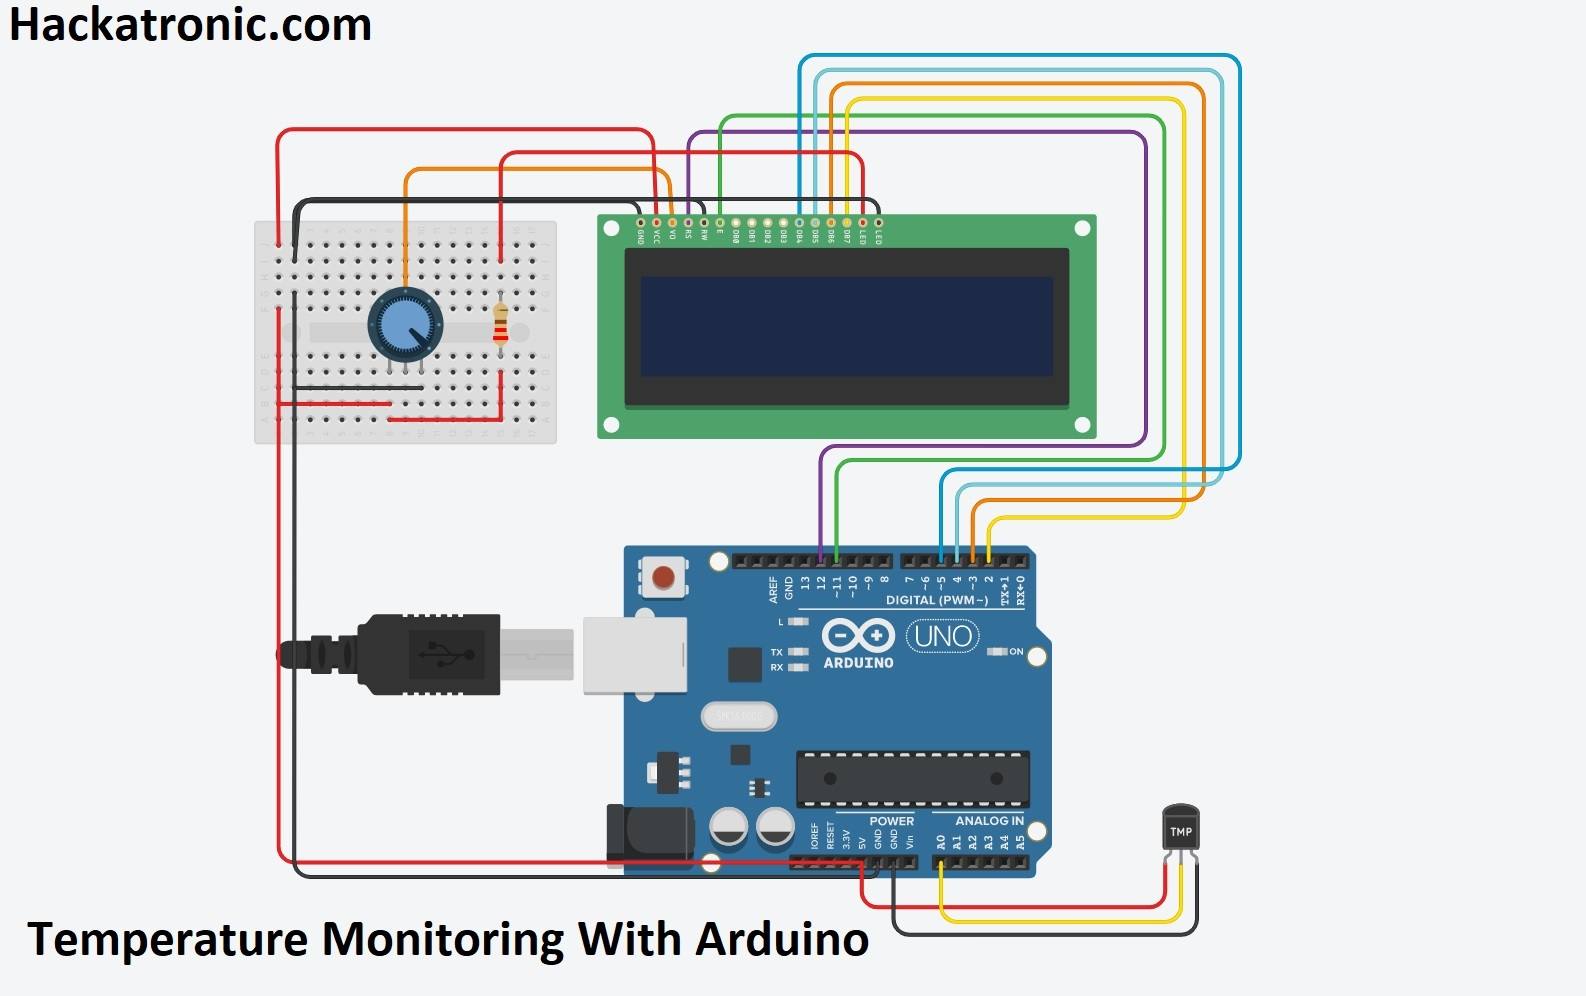 https://www.hackatronic.com/wp-content/uploads/2021/09/temperature-monitoring-with-arduino-1-1.jpg